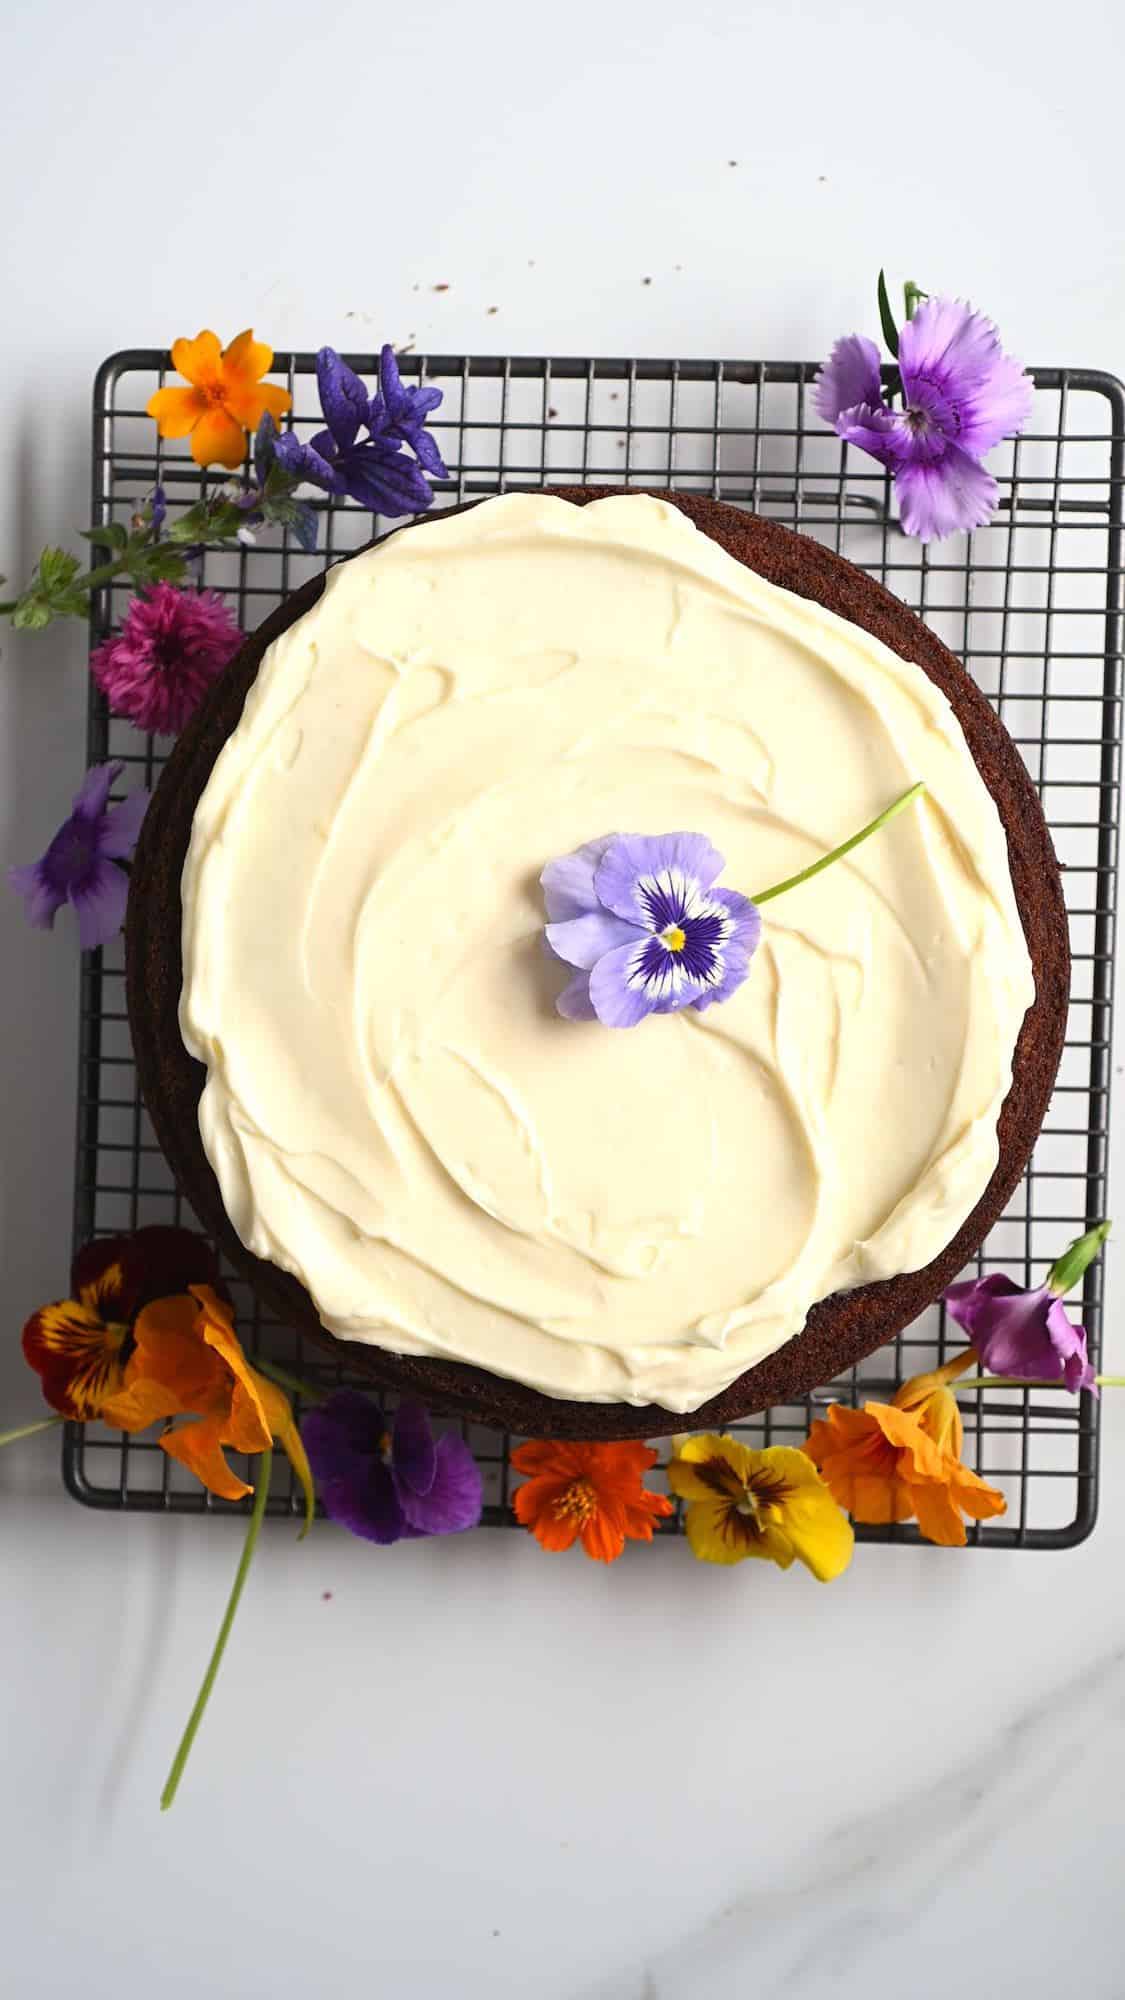 Frosted carrot cake and some edible flowers on and around it